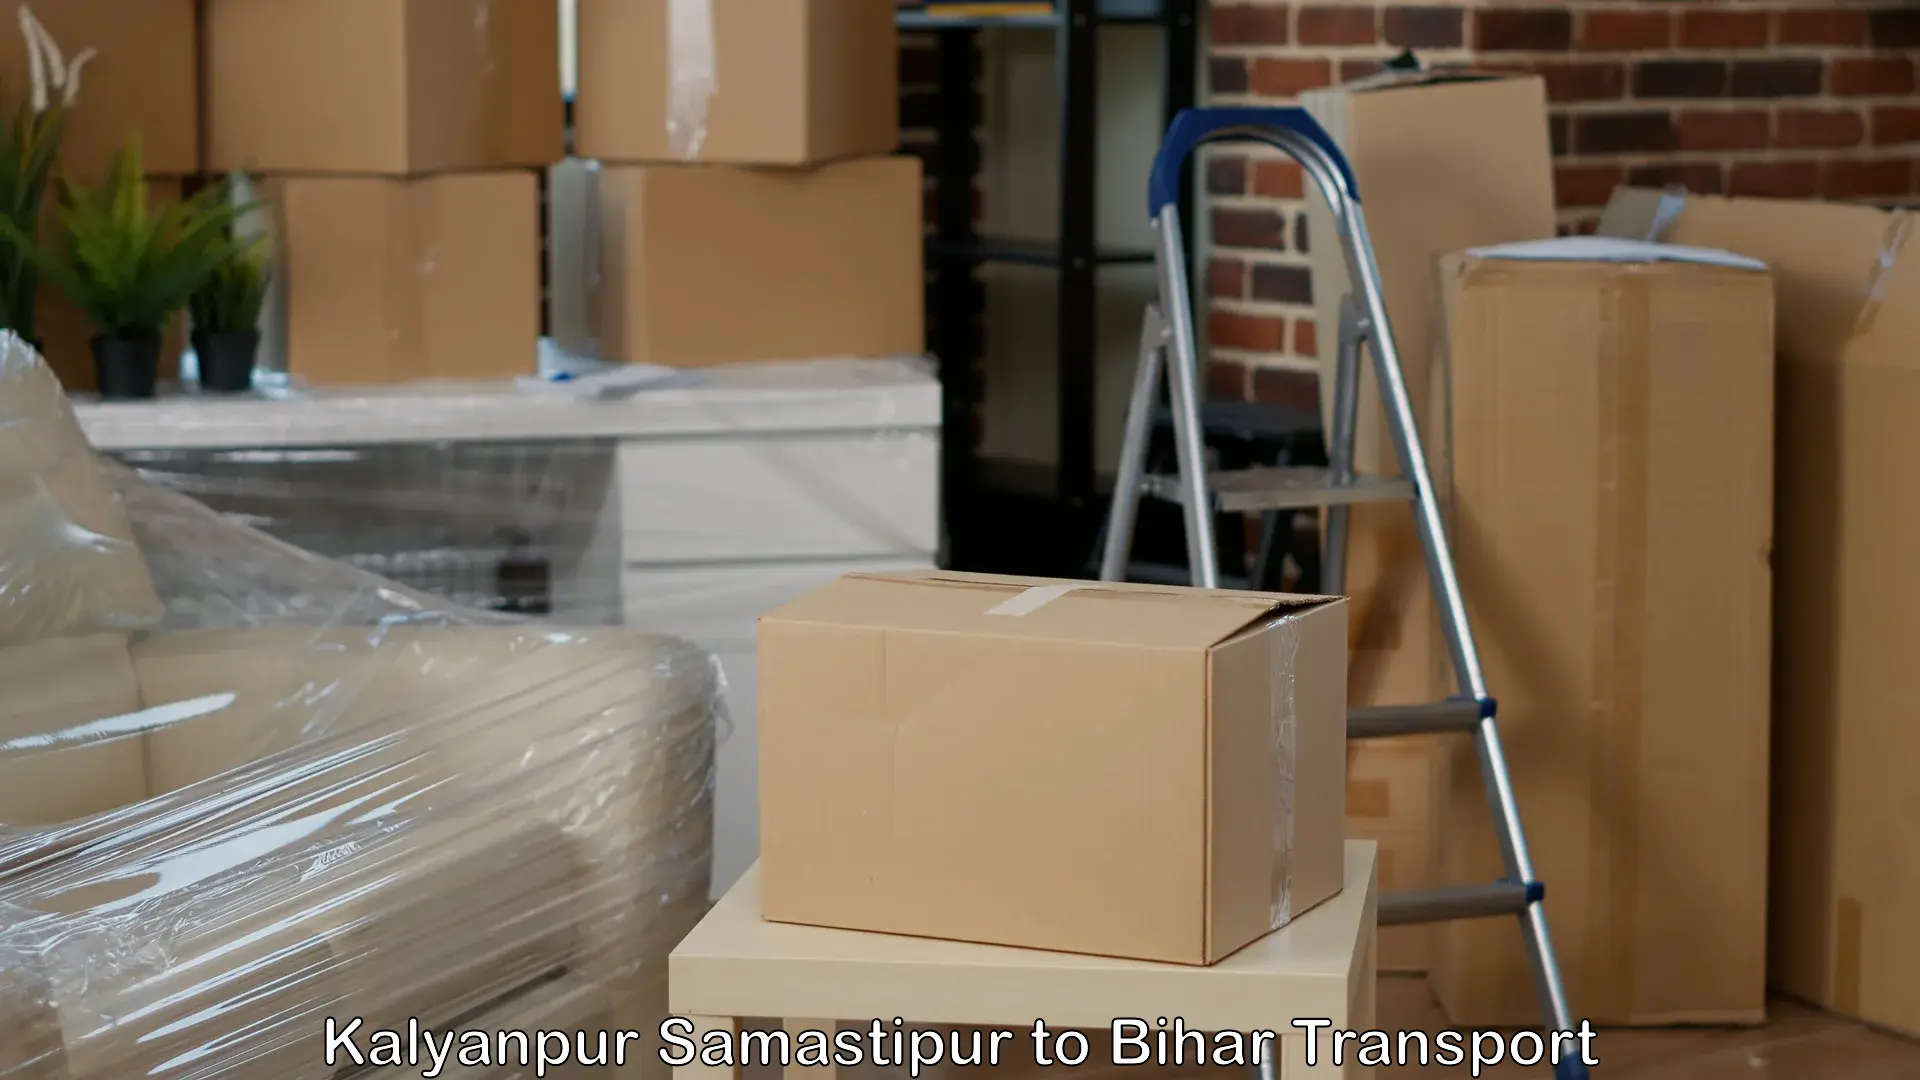 Daily parcel service transport Kalyanpur Samastipur to Rohtas